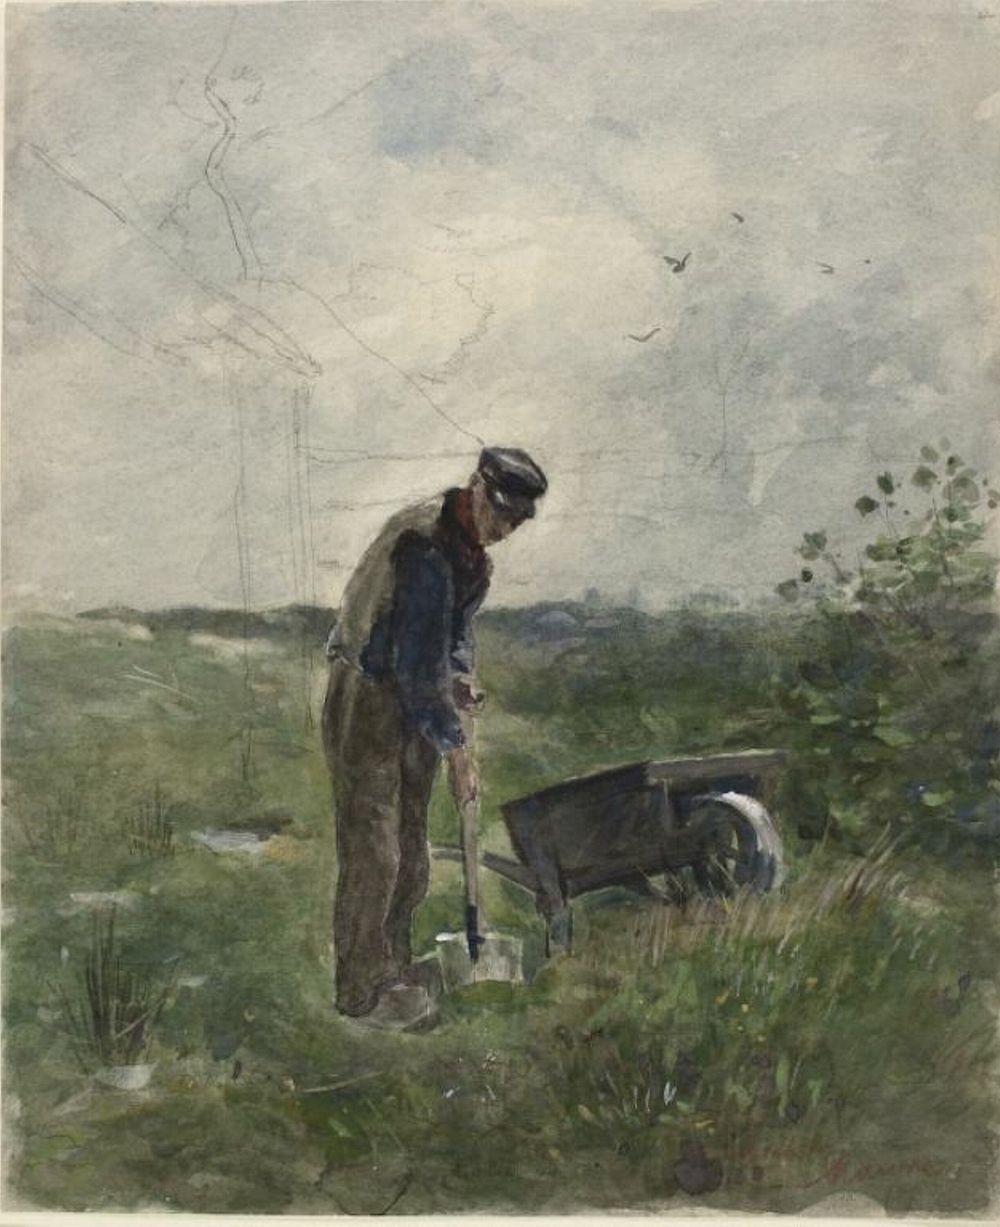 Peasant Plowing by Anton Mauve